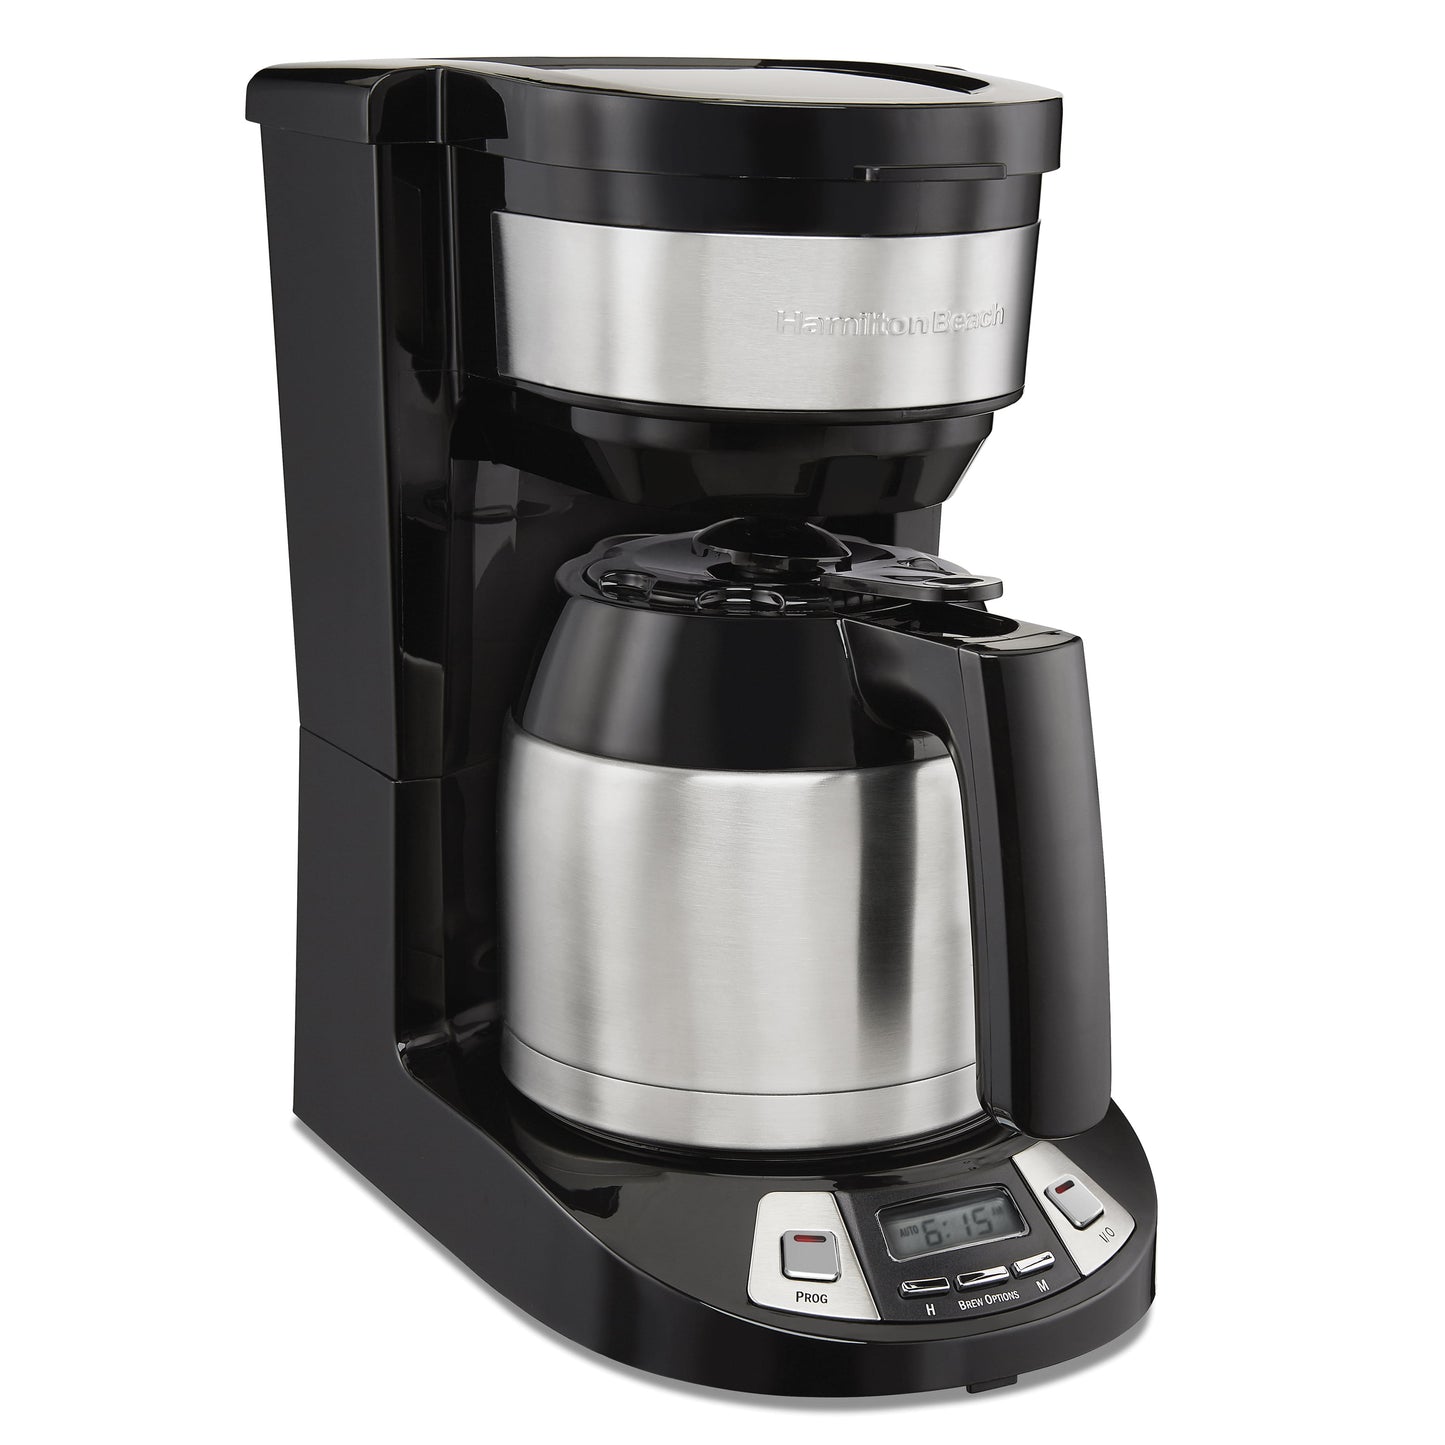 Hamilton Beach Programmable 8 Cup Coffee Maker, Thermal Carafe, Black & Stainless, Model 46240